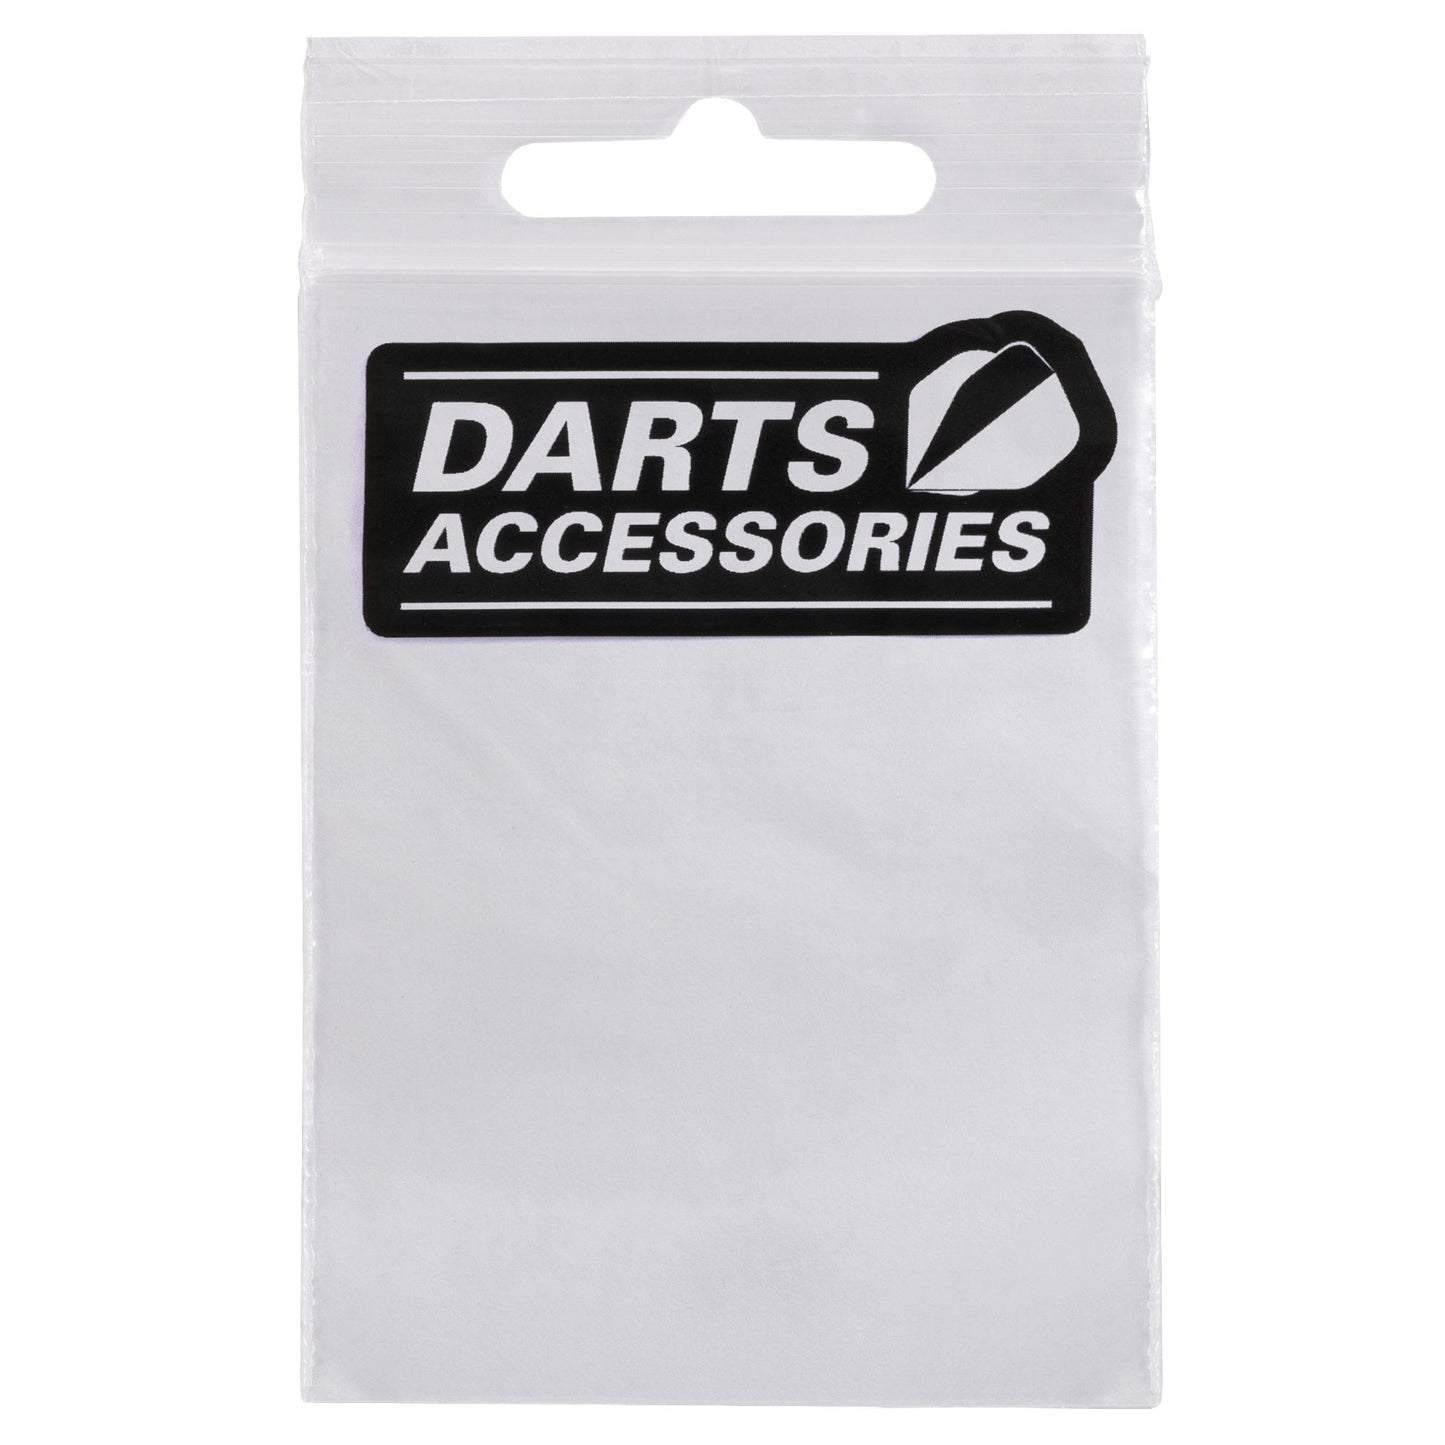 Printed Grip Seal Bags with Dart Accessories (100)